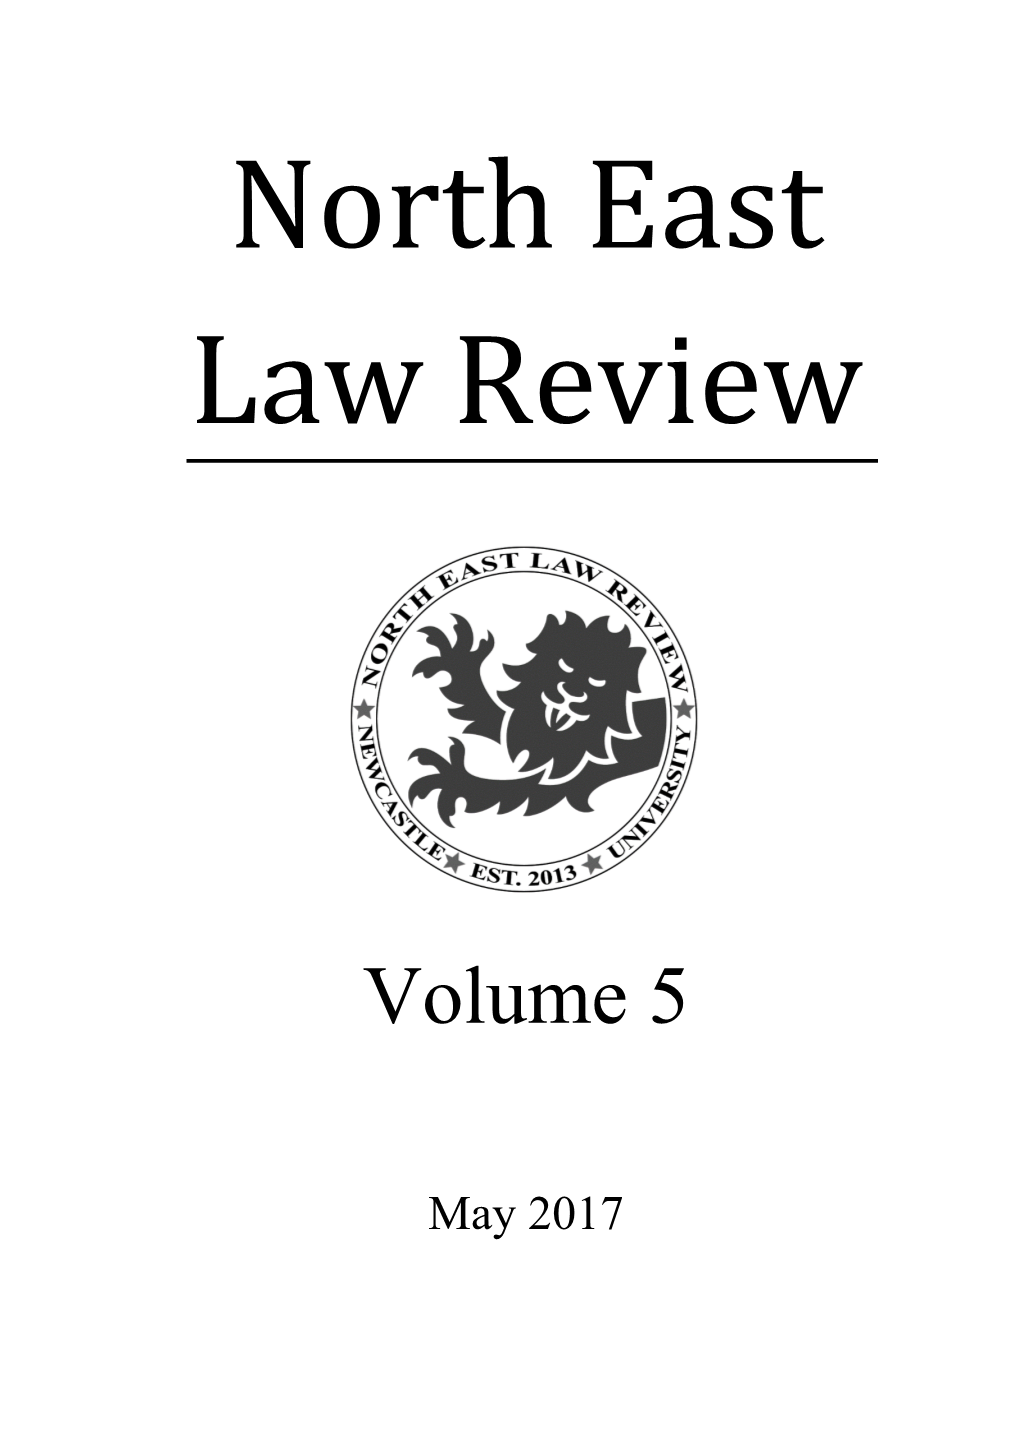 North East Law Review